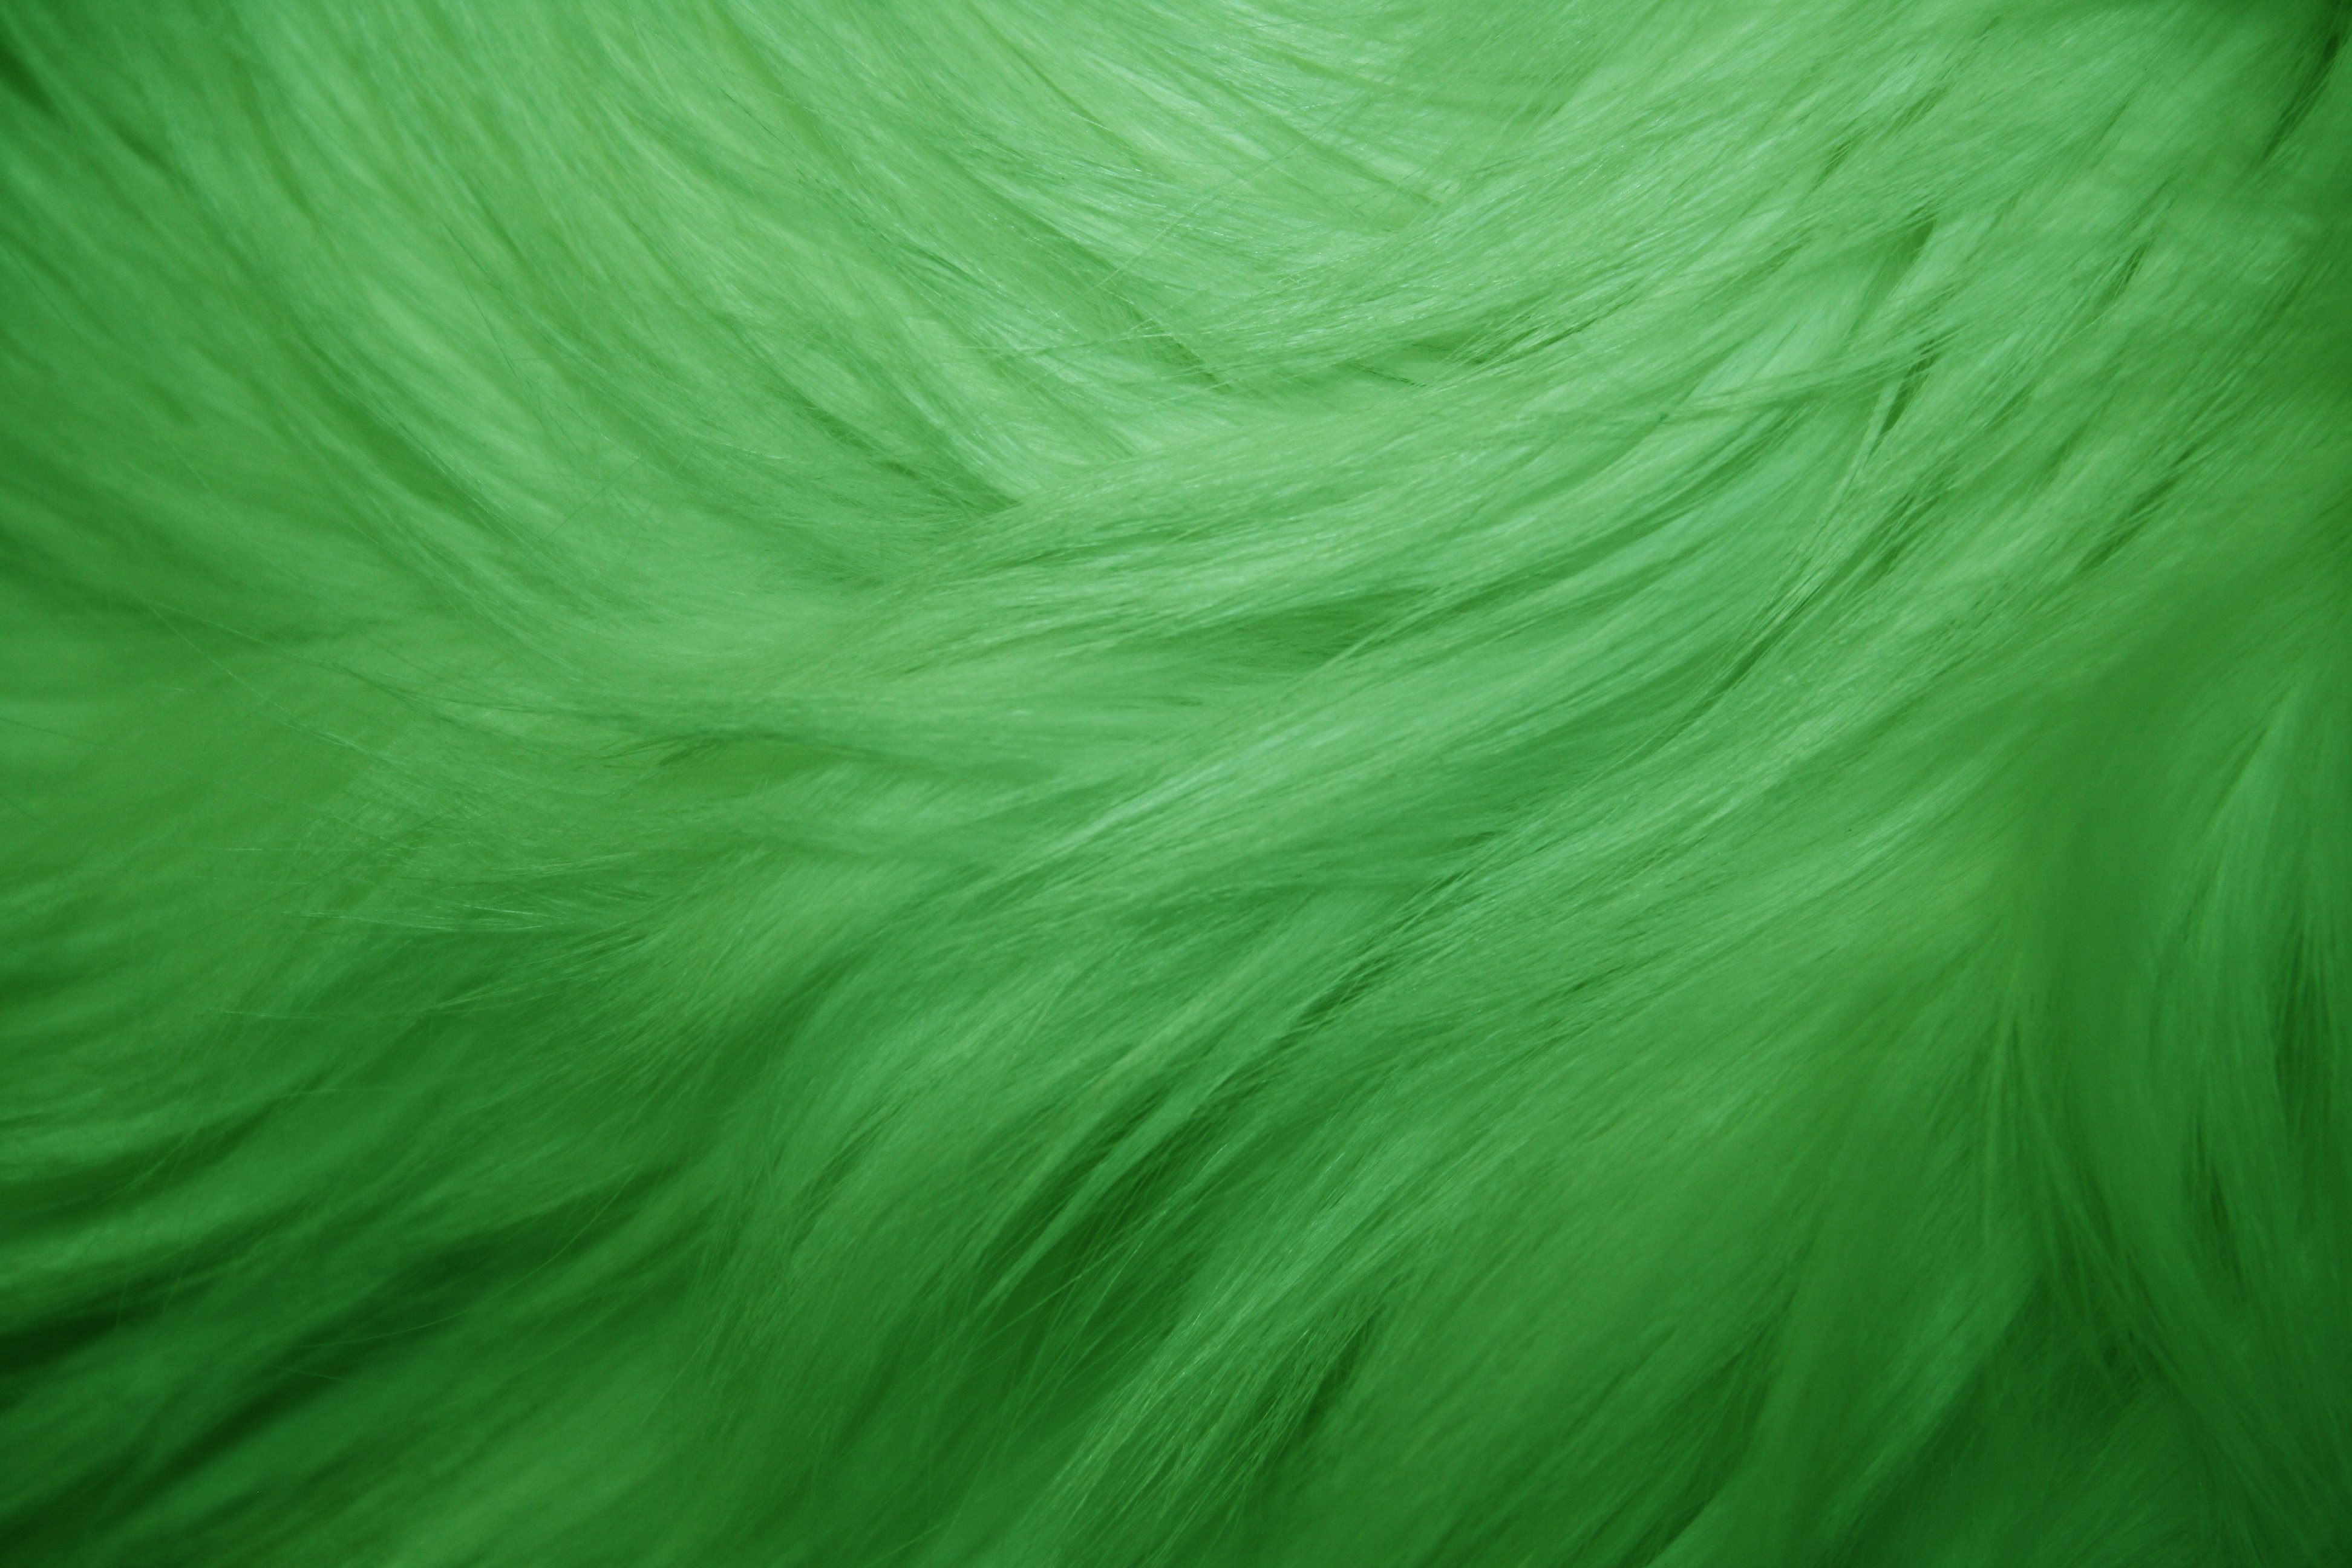 Green Fluffy Wool Texture, Animal Wool Background, Painted Fur Texture  Closeup Stock Photo Image Of Surface, Cotton: 175601980